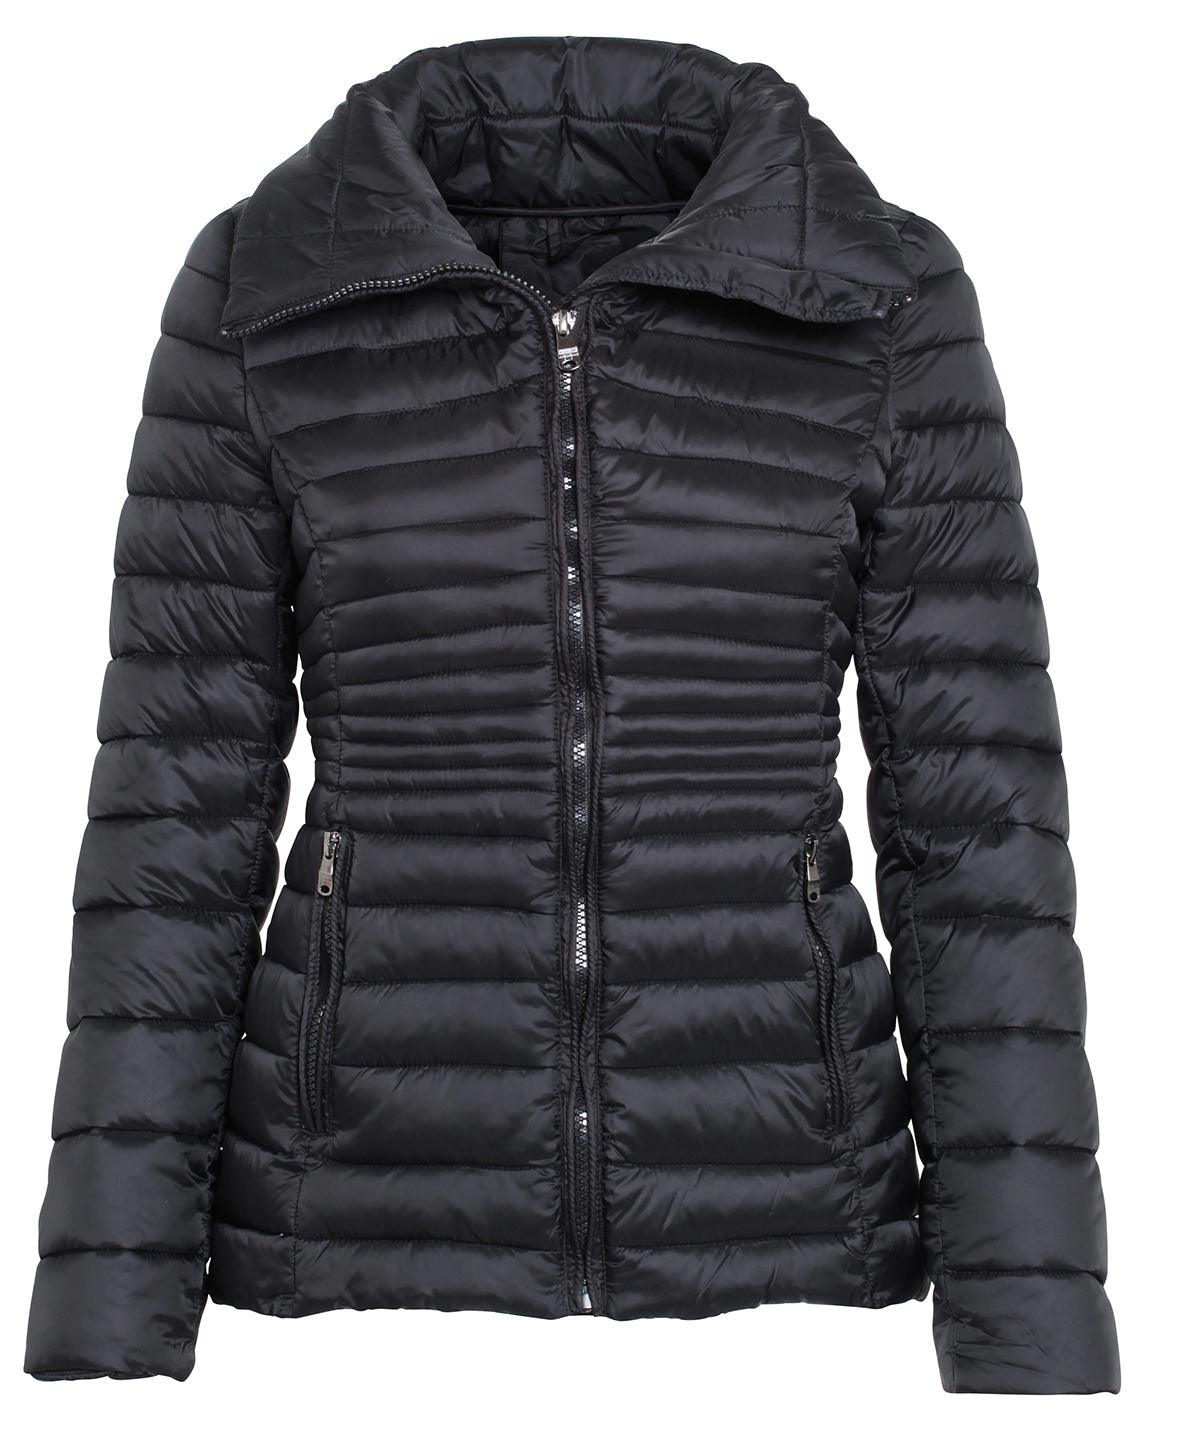 Black - Women's contour quilted jacket Jackets 2786 Jackets & Coats, Padded & Insulation, Rebrandable, Women's Fashion Schoolwear Centres